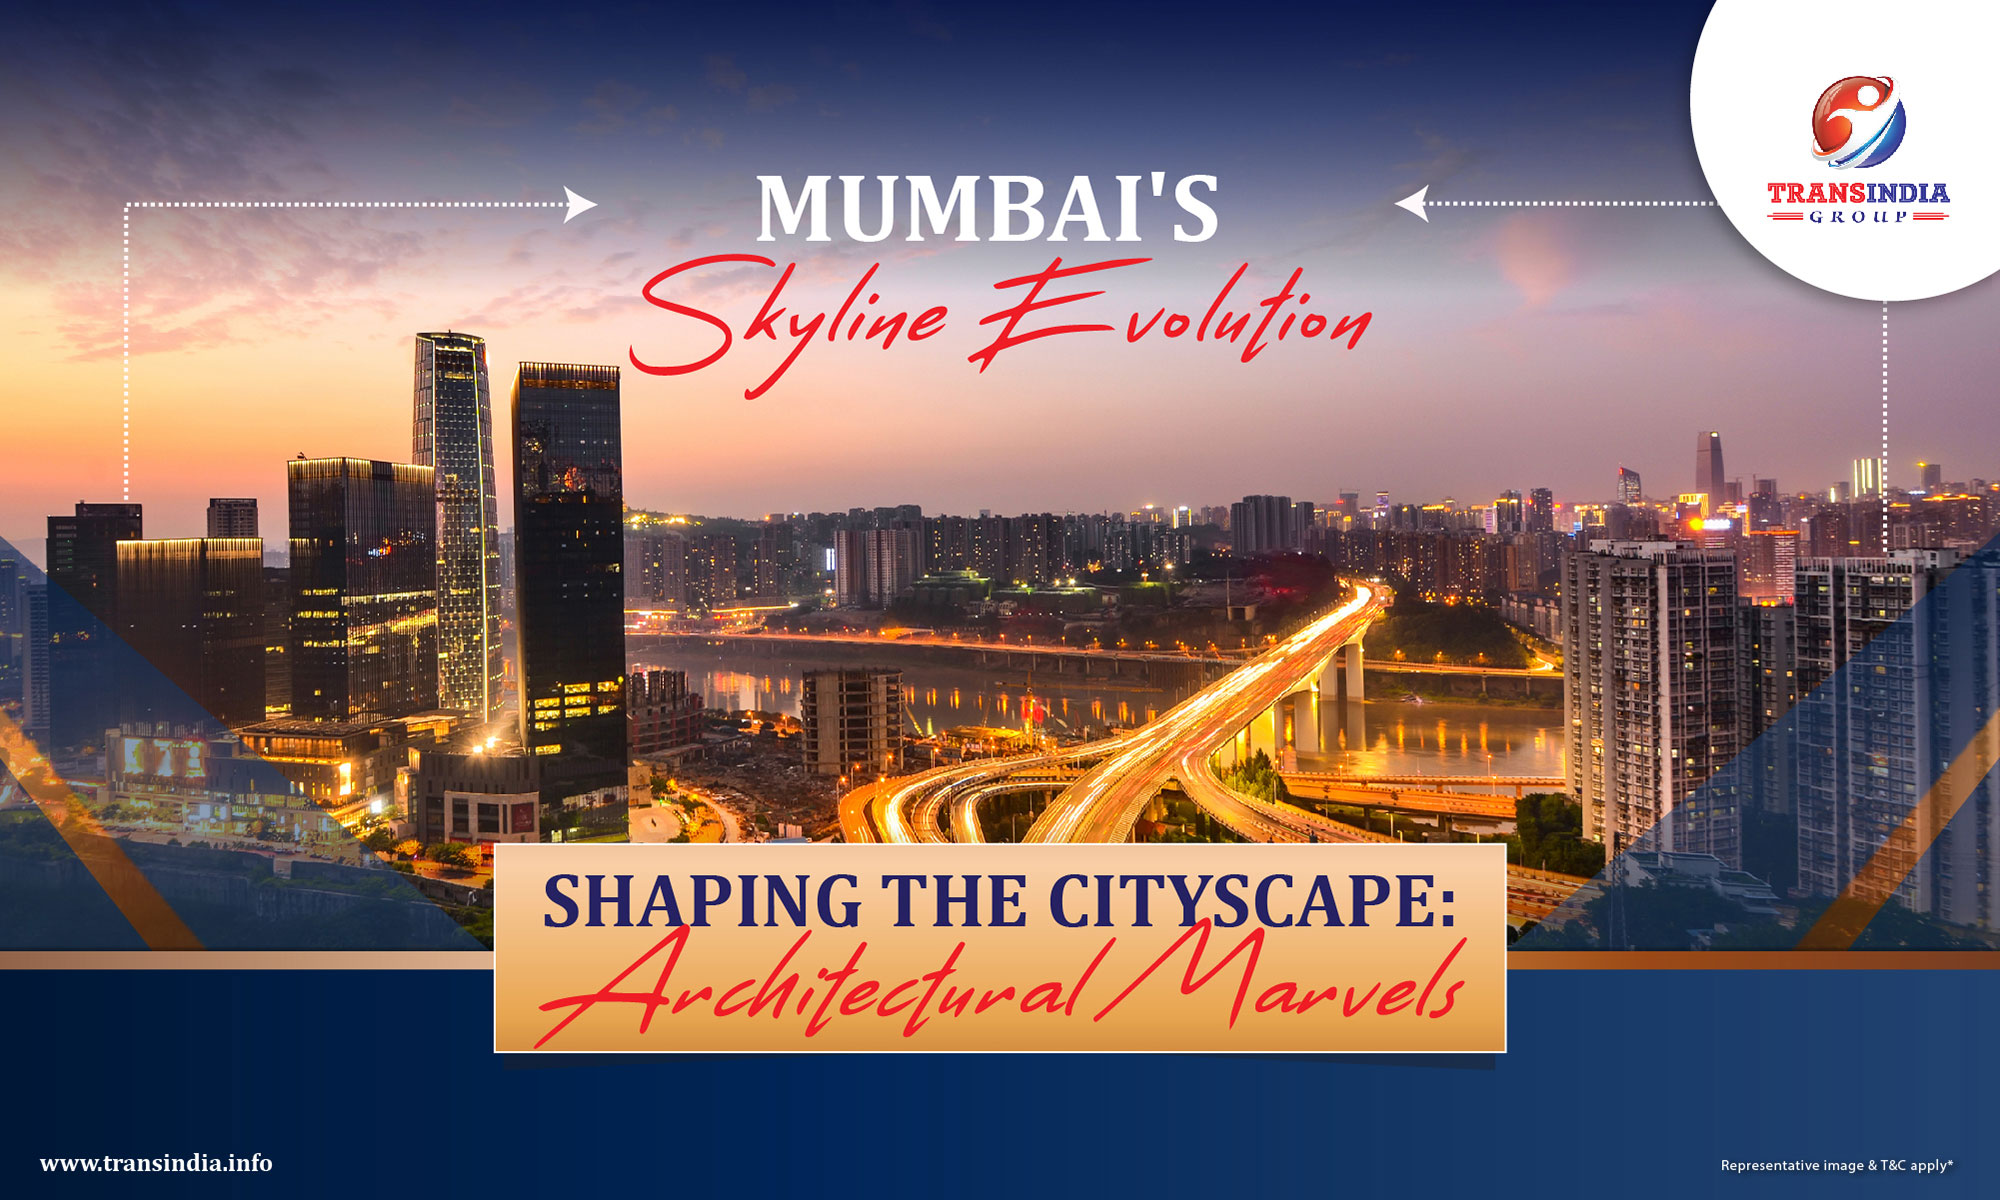 Mumbai’s Skyline Evolution: Architectural Marvels Shaping the Cityscape